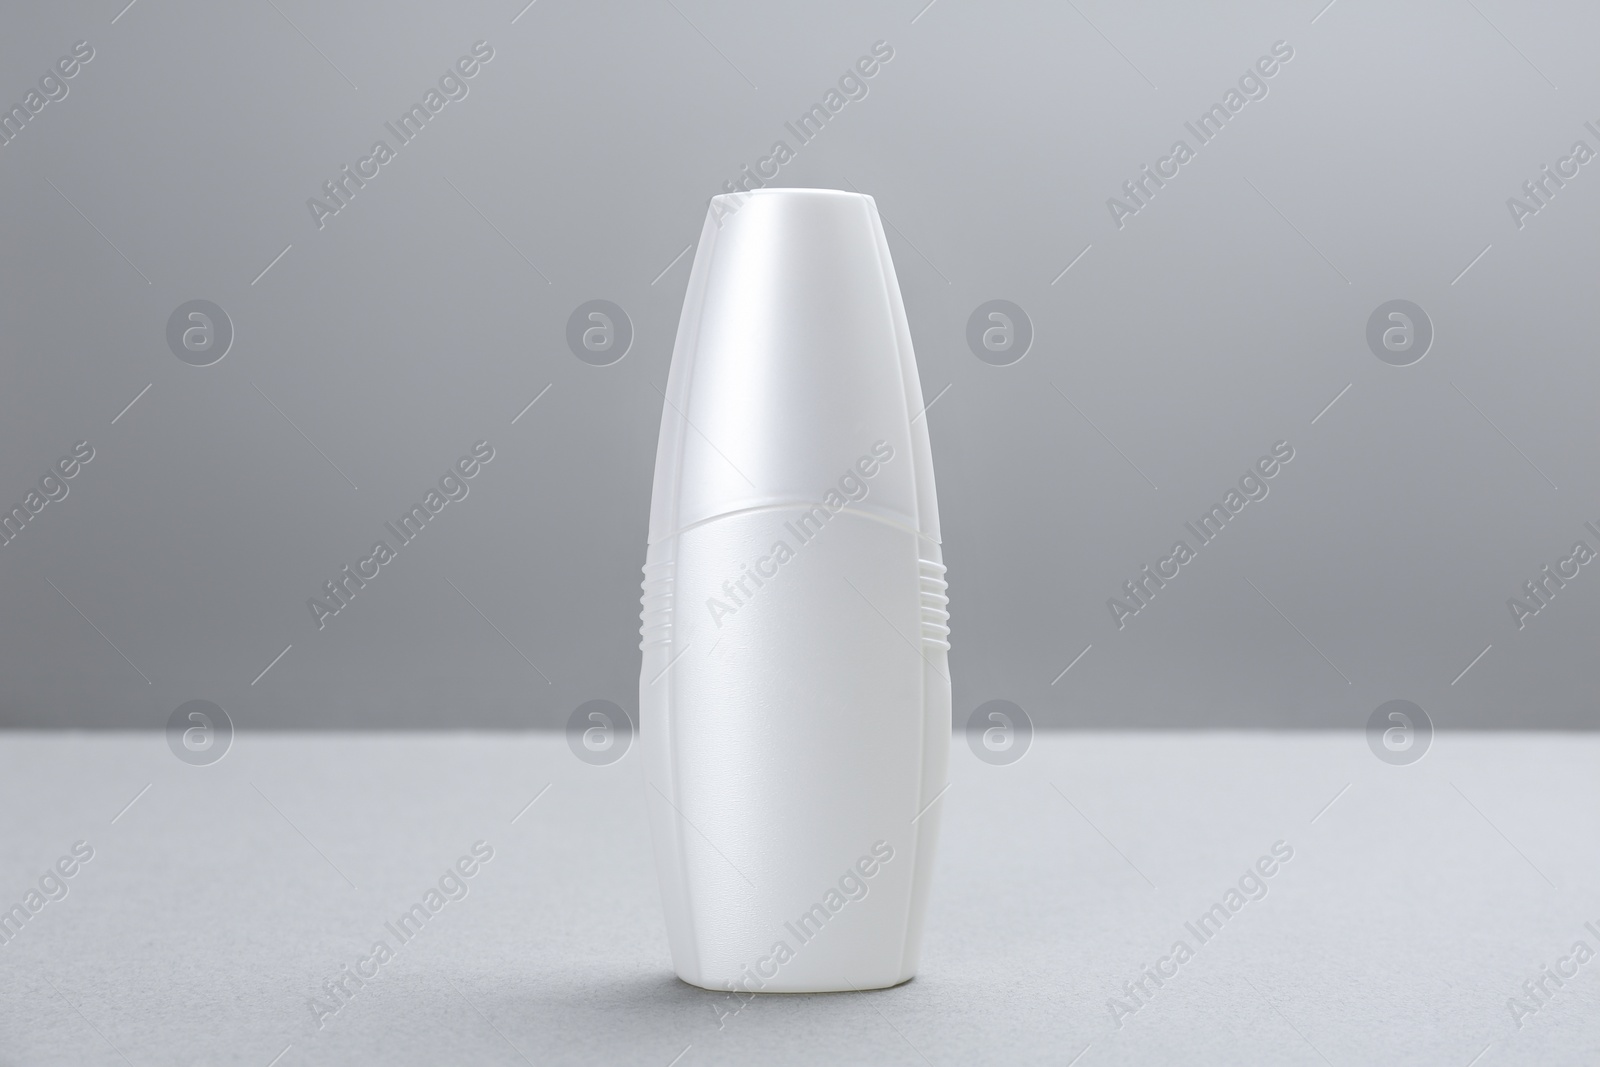 Photo of Bottle with insect repellent spray on grey background